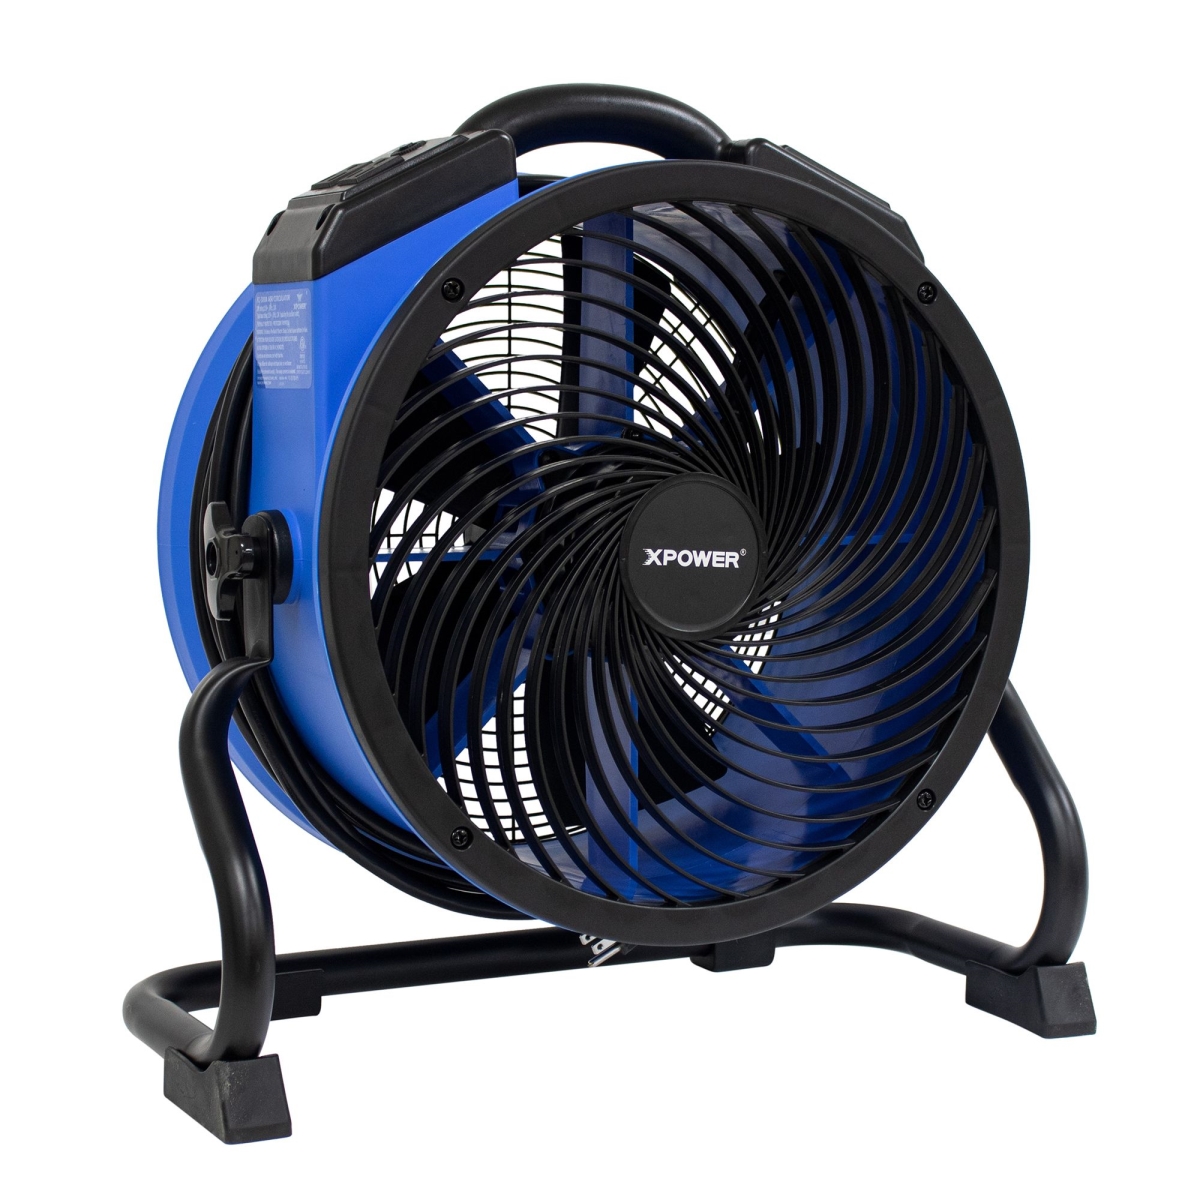 Picture of Xpower FC-300A 14 in. 0.25 HP 2100 CFM 4 Speed Portable Multipurpose Heavy Duty Shop Fan Air Circulator with Built-in Power Outlets